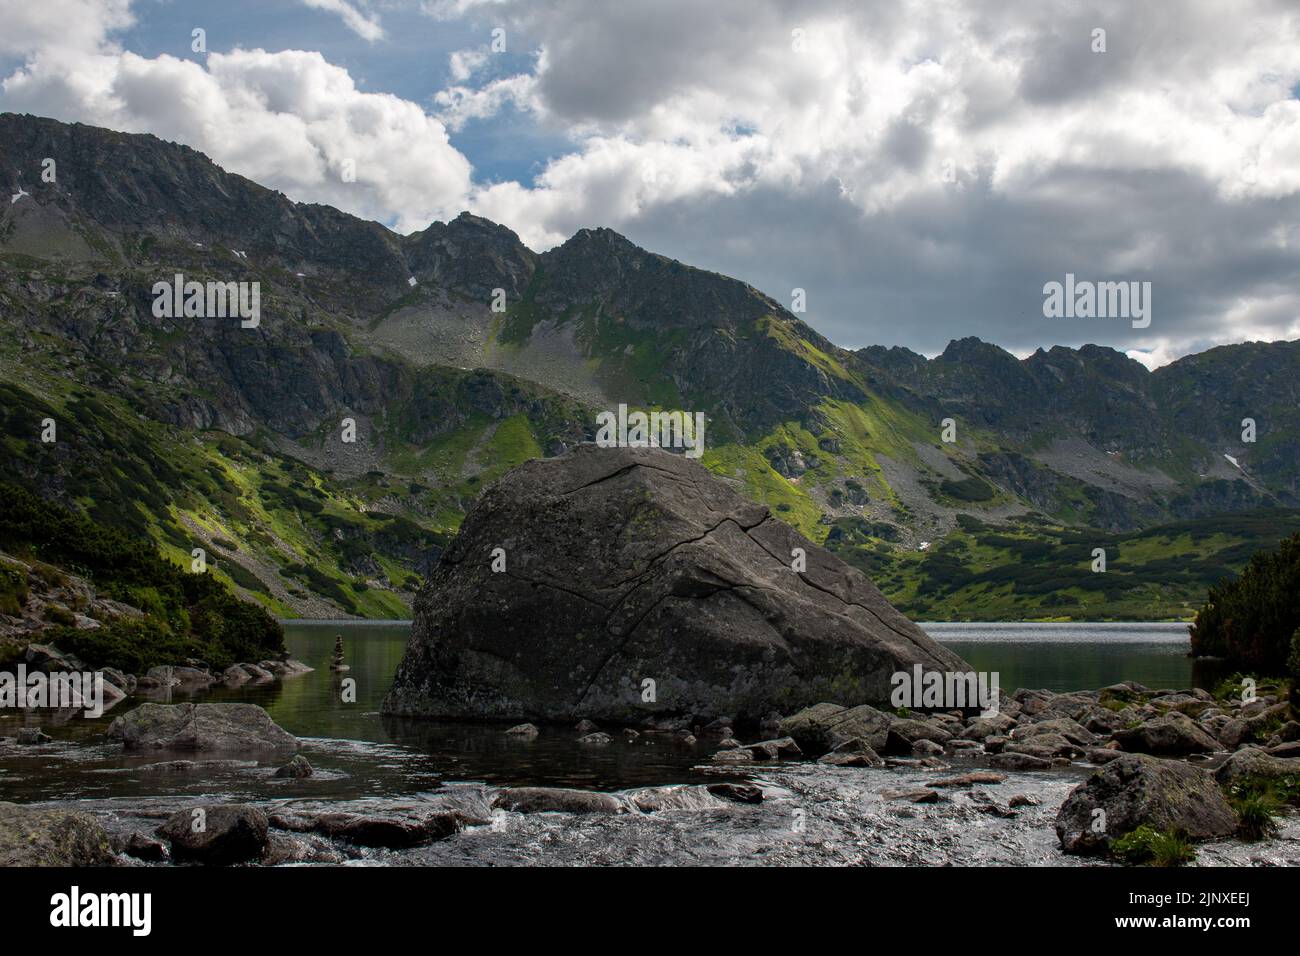 A large rock in the Wielki Staw lake in the valley of five lakes, Poland Stock Photo